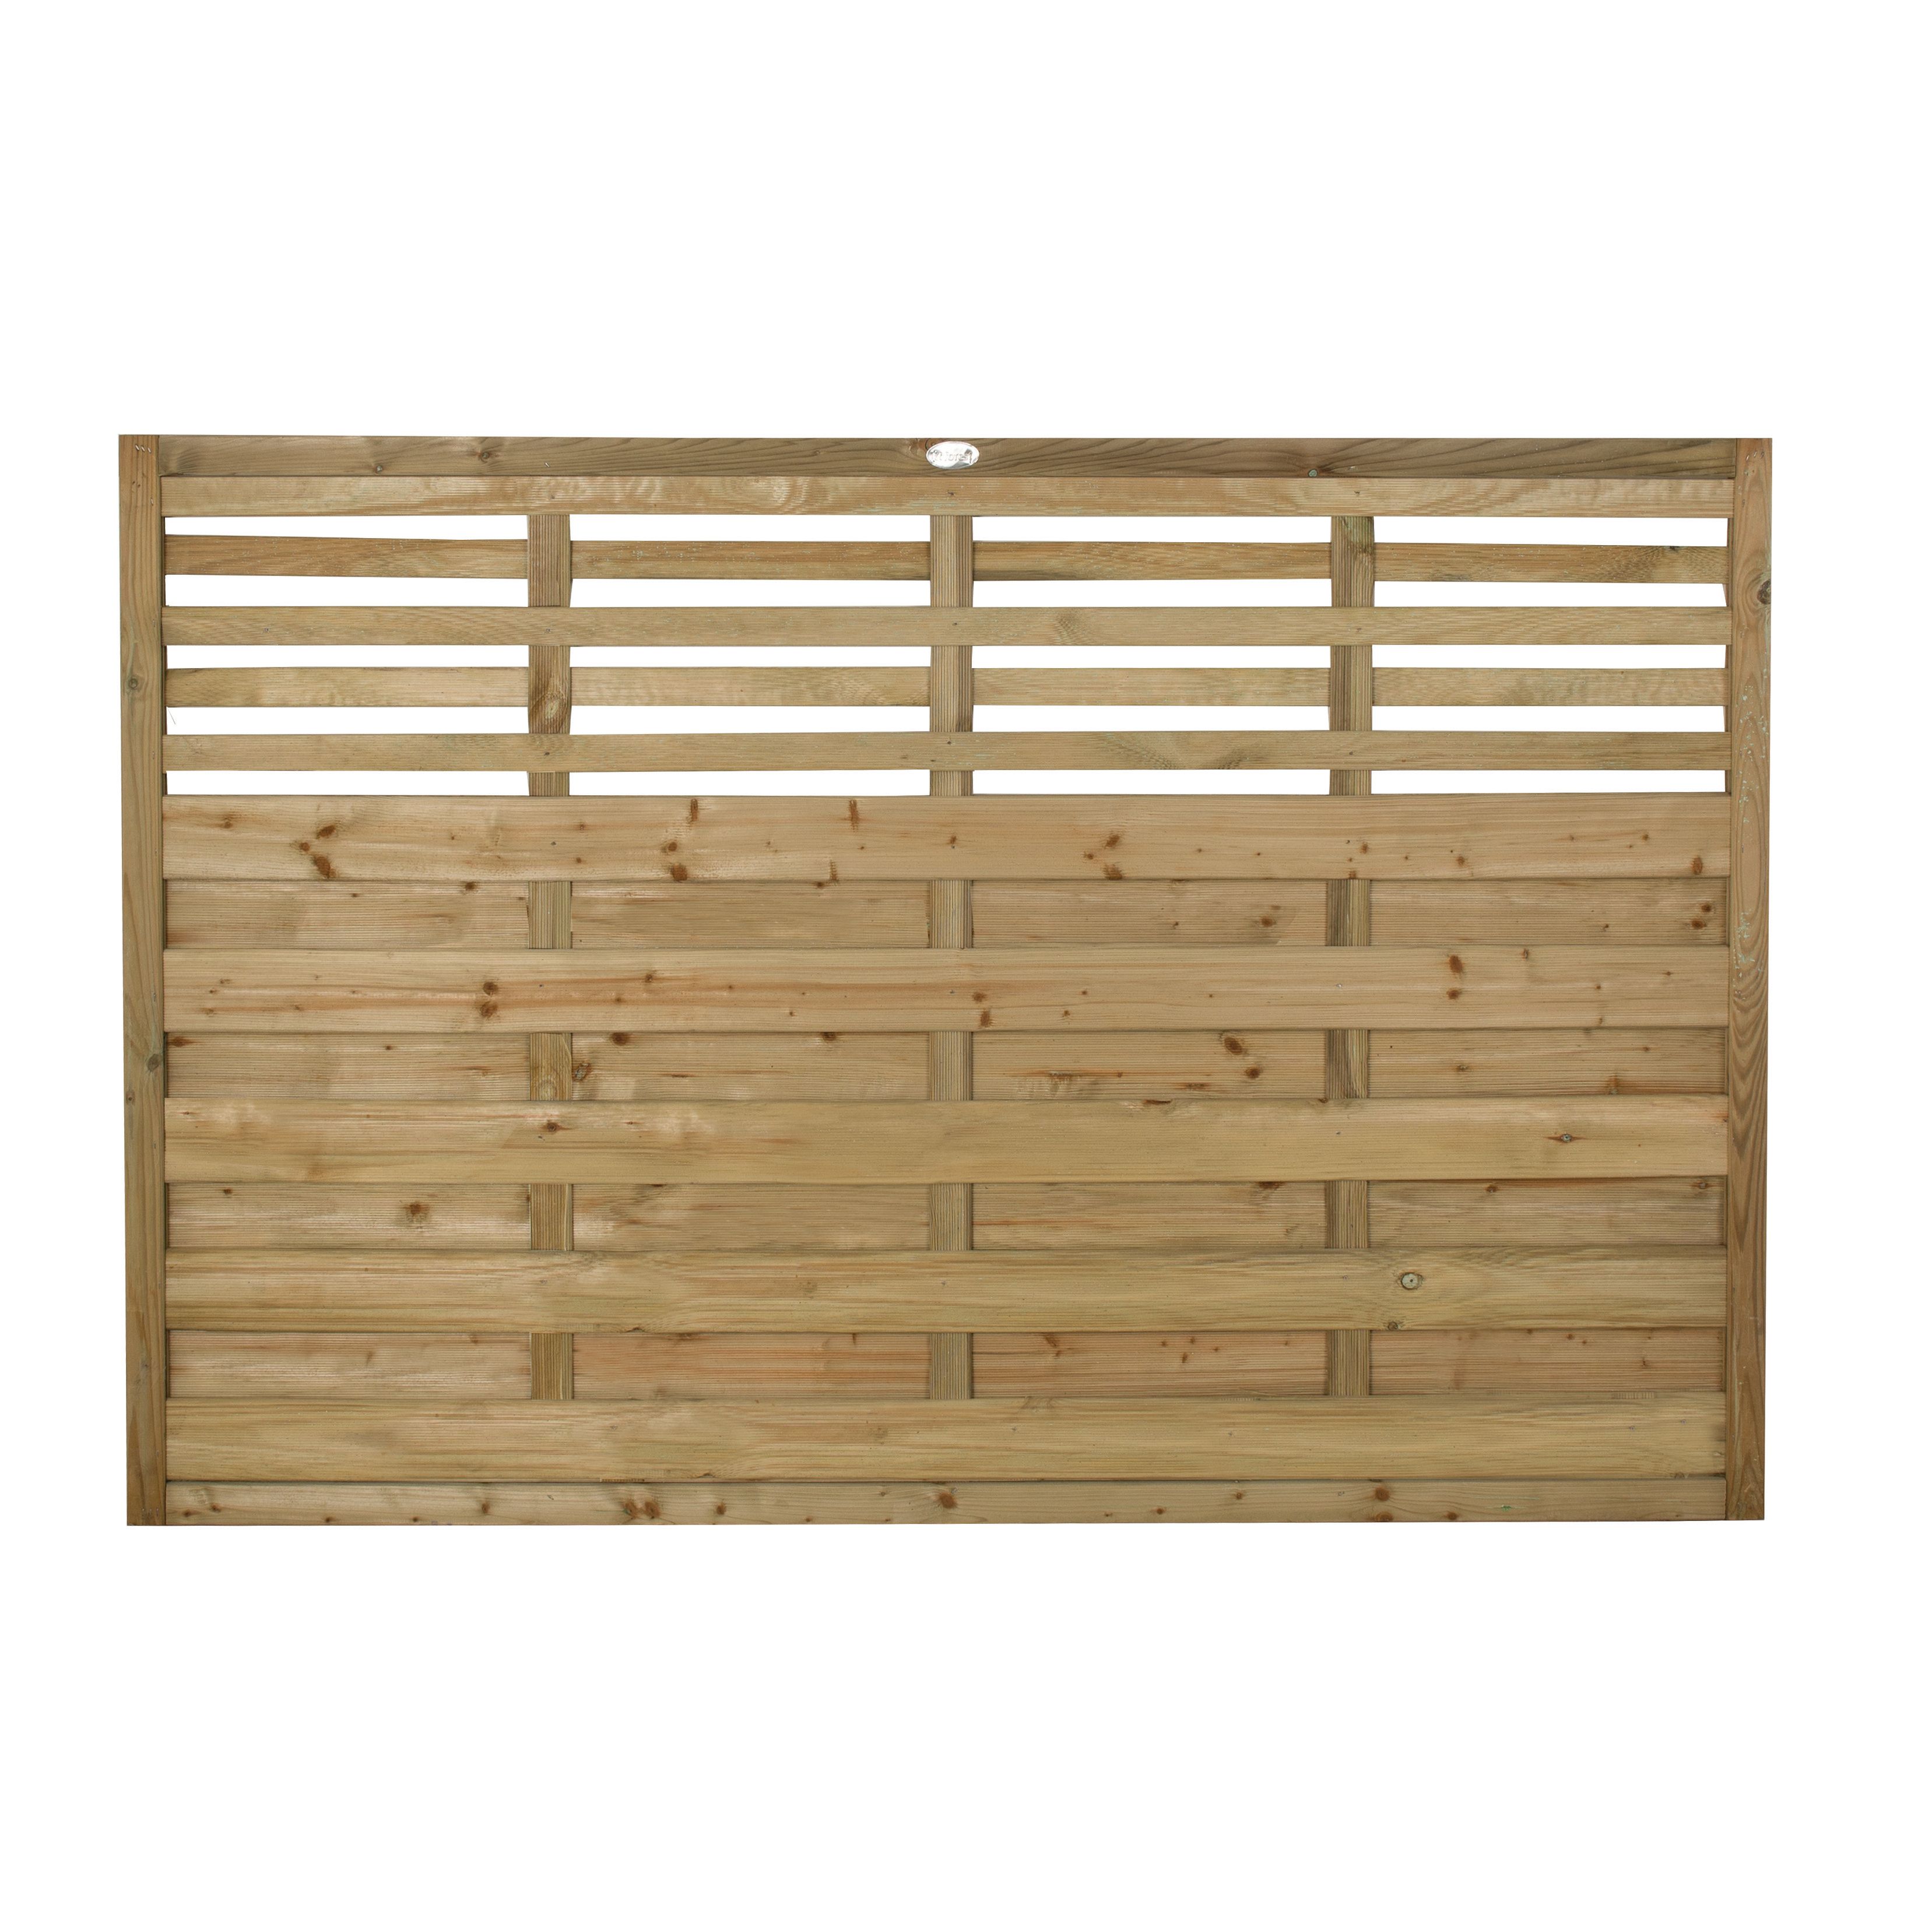 Image of Forest Garden Pressure Treated Kyoto Fence Panel - 1800 x 1200mm - 6 x 4ft - Pack of 3